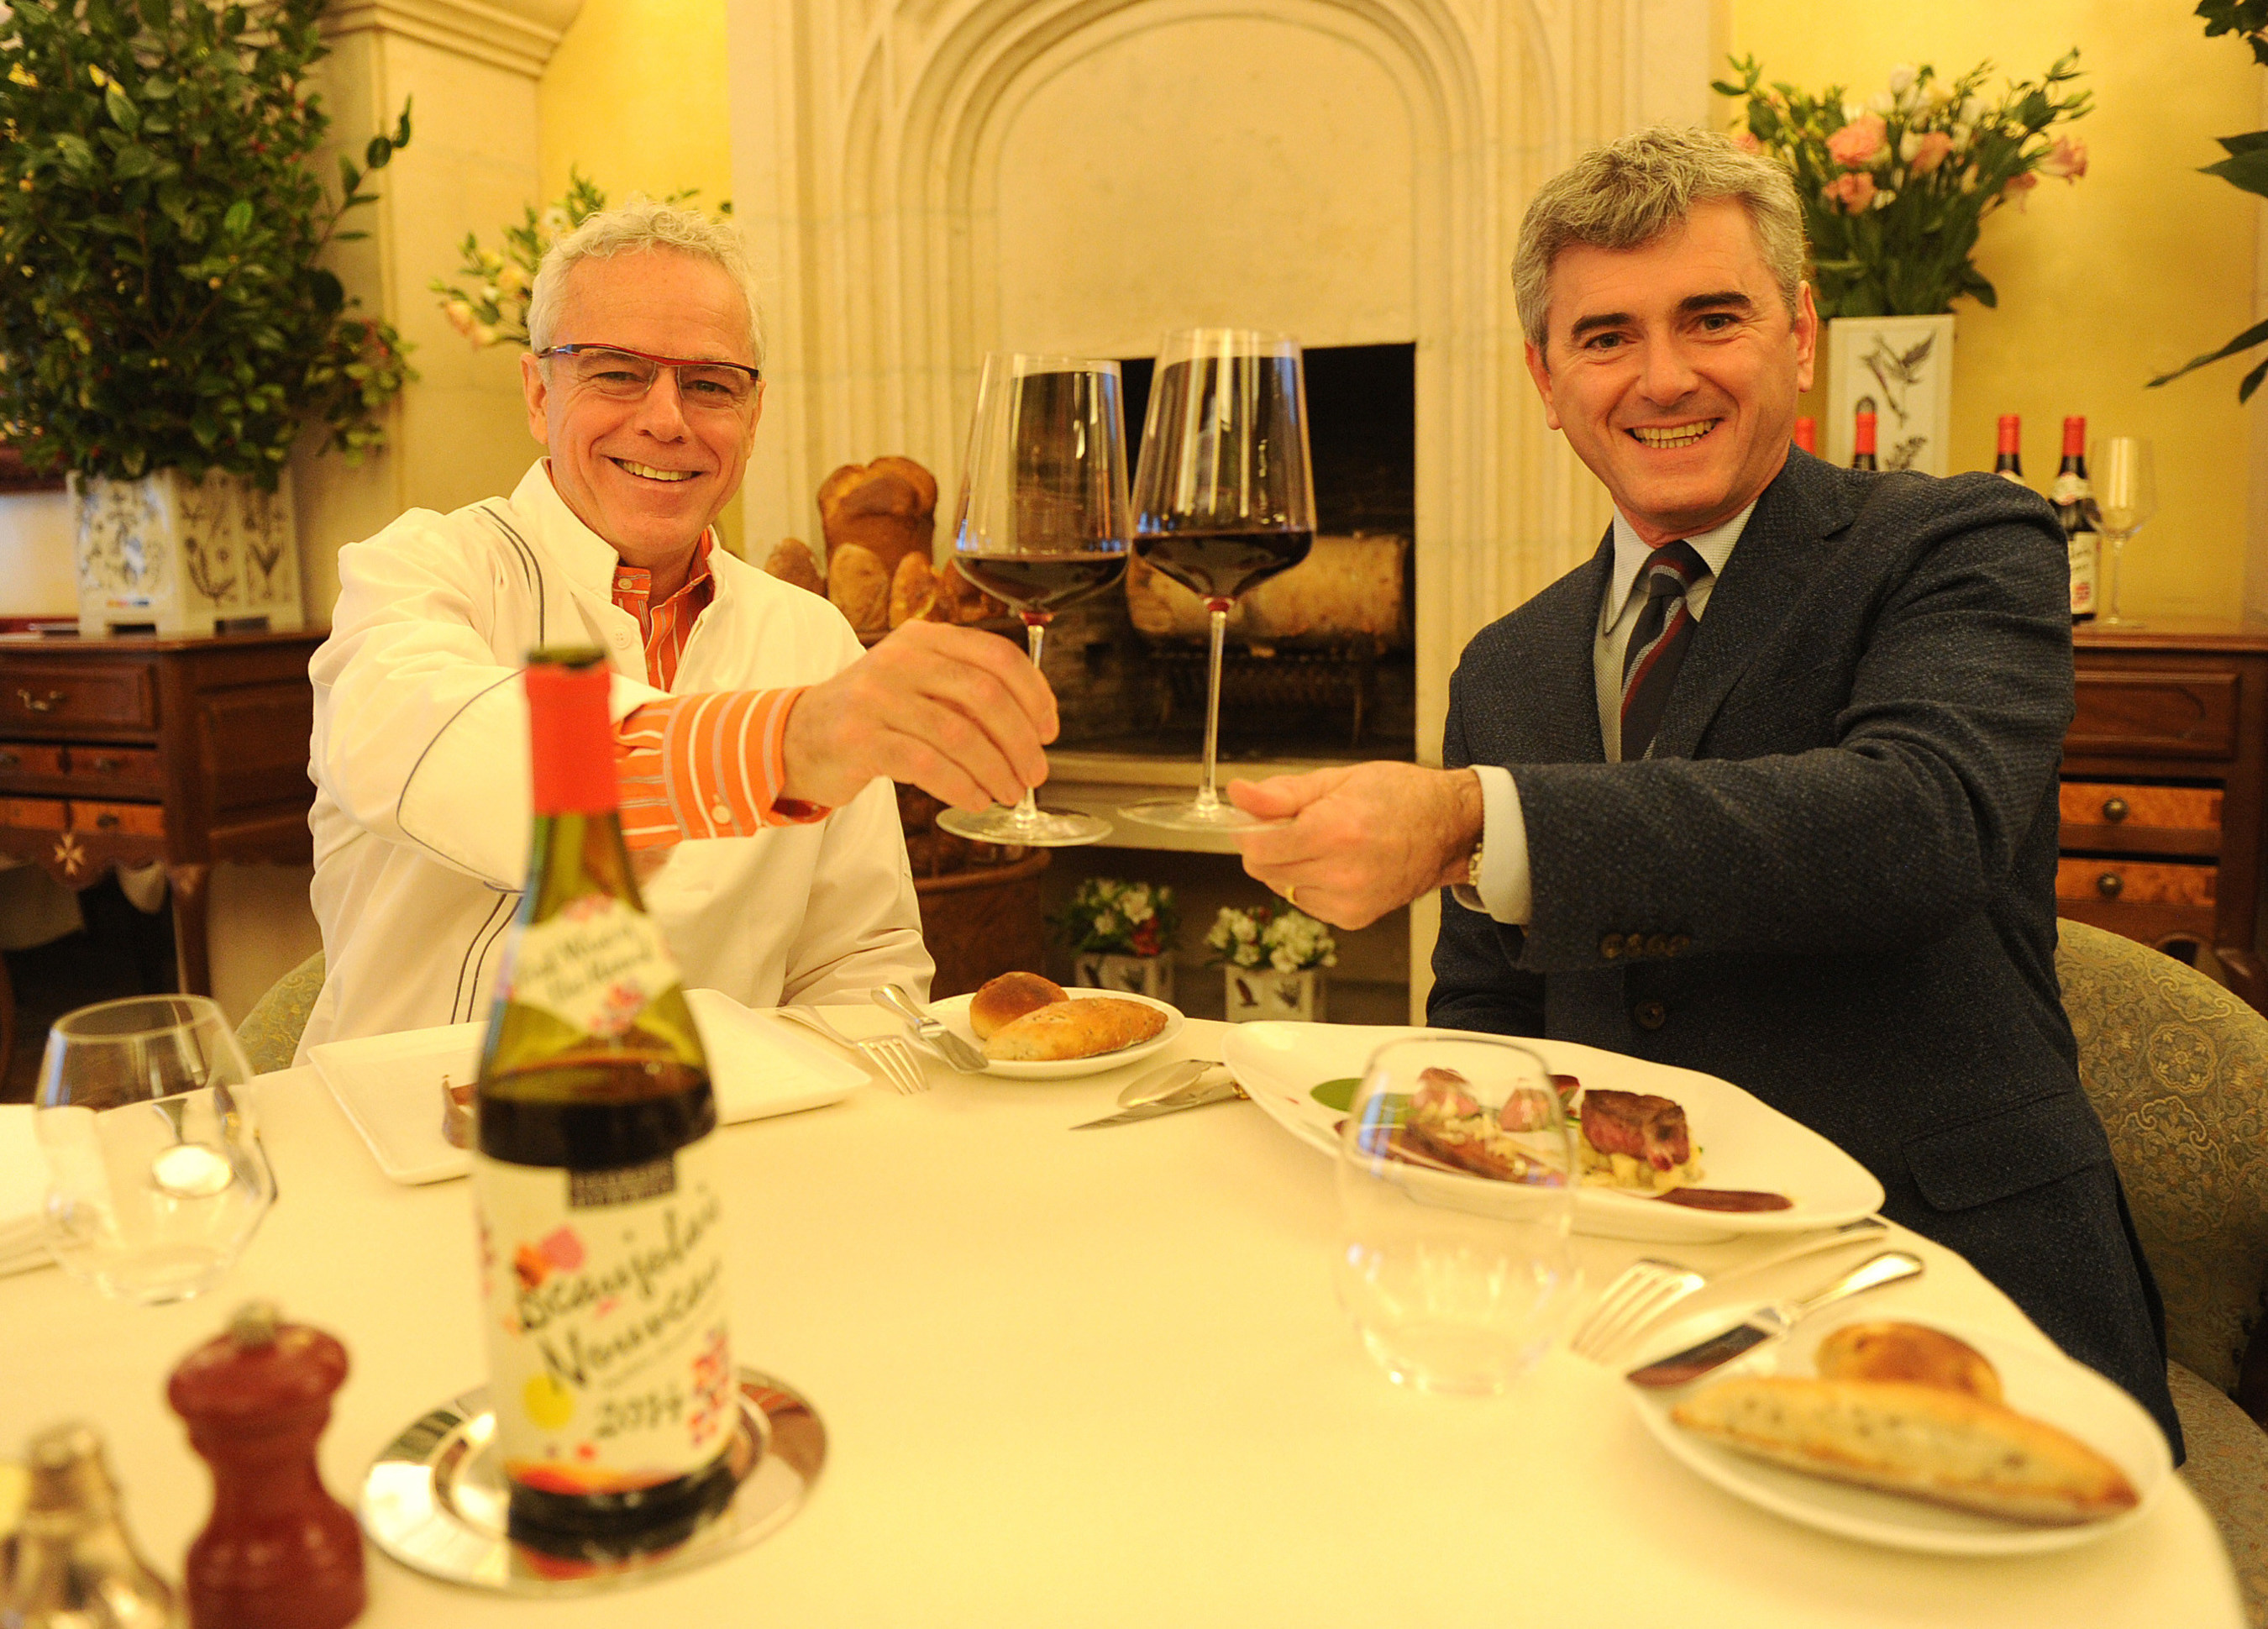 Franck Duboeuf, right, and chef David Bouley celebrate the arrival of the 2014 Georges Duboeuf Beaujolais Nouveau in the U.S., Wednesday, Nov. 19, 2014, at Bouley in New York.  According to French law, the wine is released on the third Thursday of each November.  (Photo by Diane Bondareff/Invision for Les Vins Georges Duboeuf)